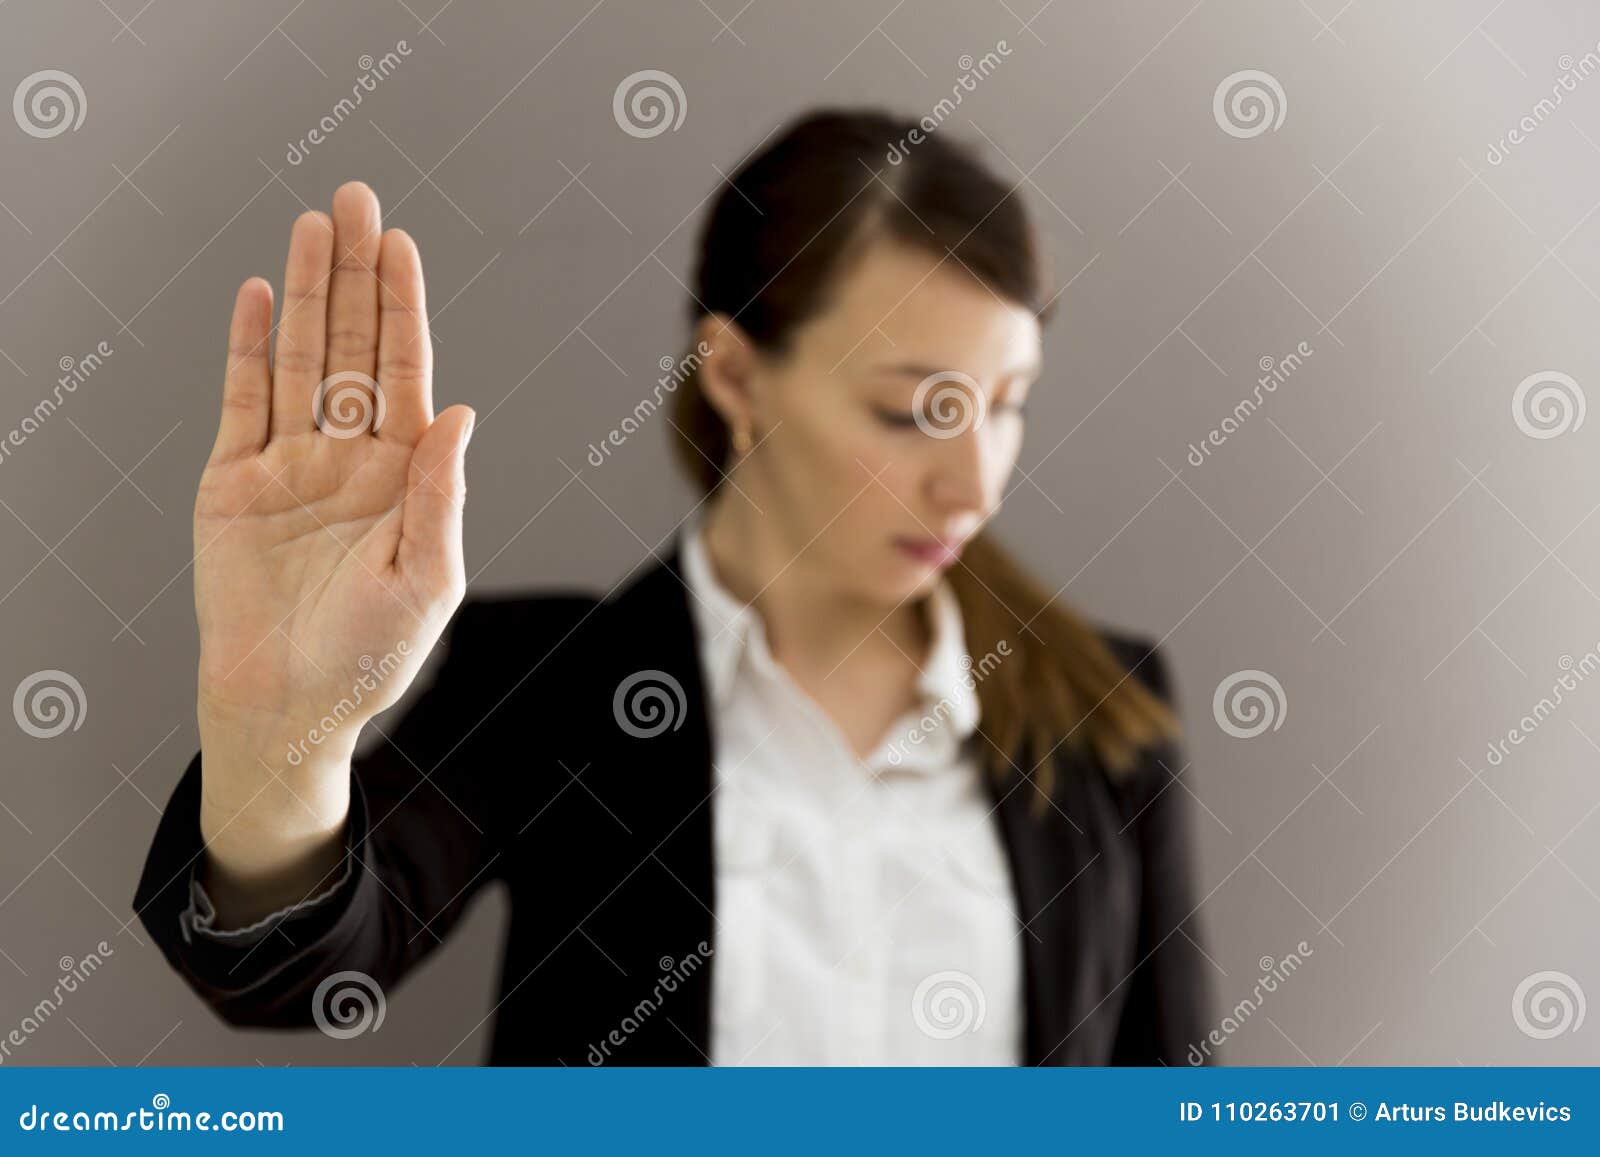 woman in business suit showing her palm, body language, say no a